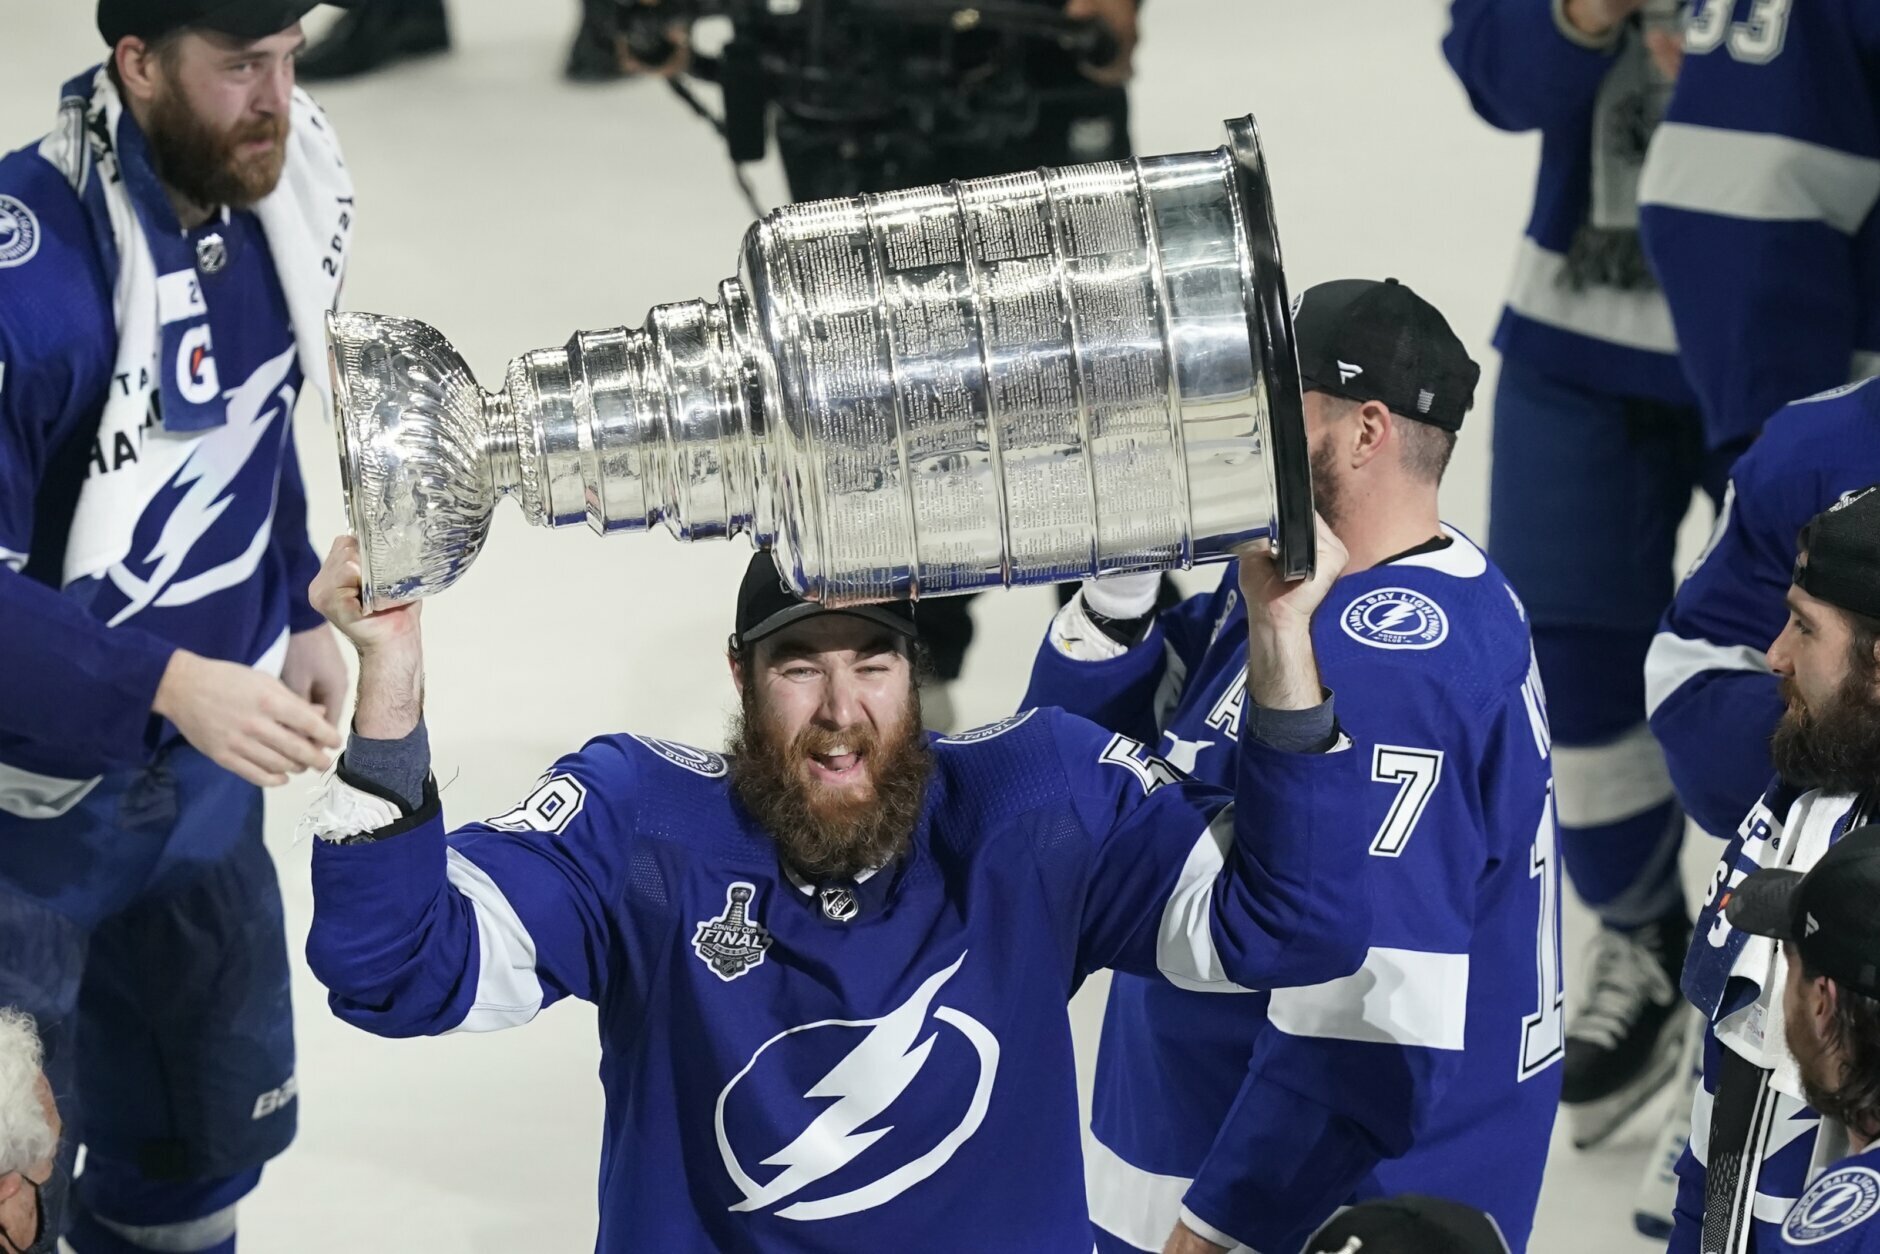 Tampa Bay Lightning win Stanley Cup, defeating Montreal Canadiens 1-0 to  claim back-to-back championships - CBS News